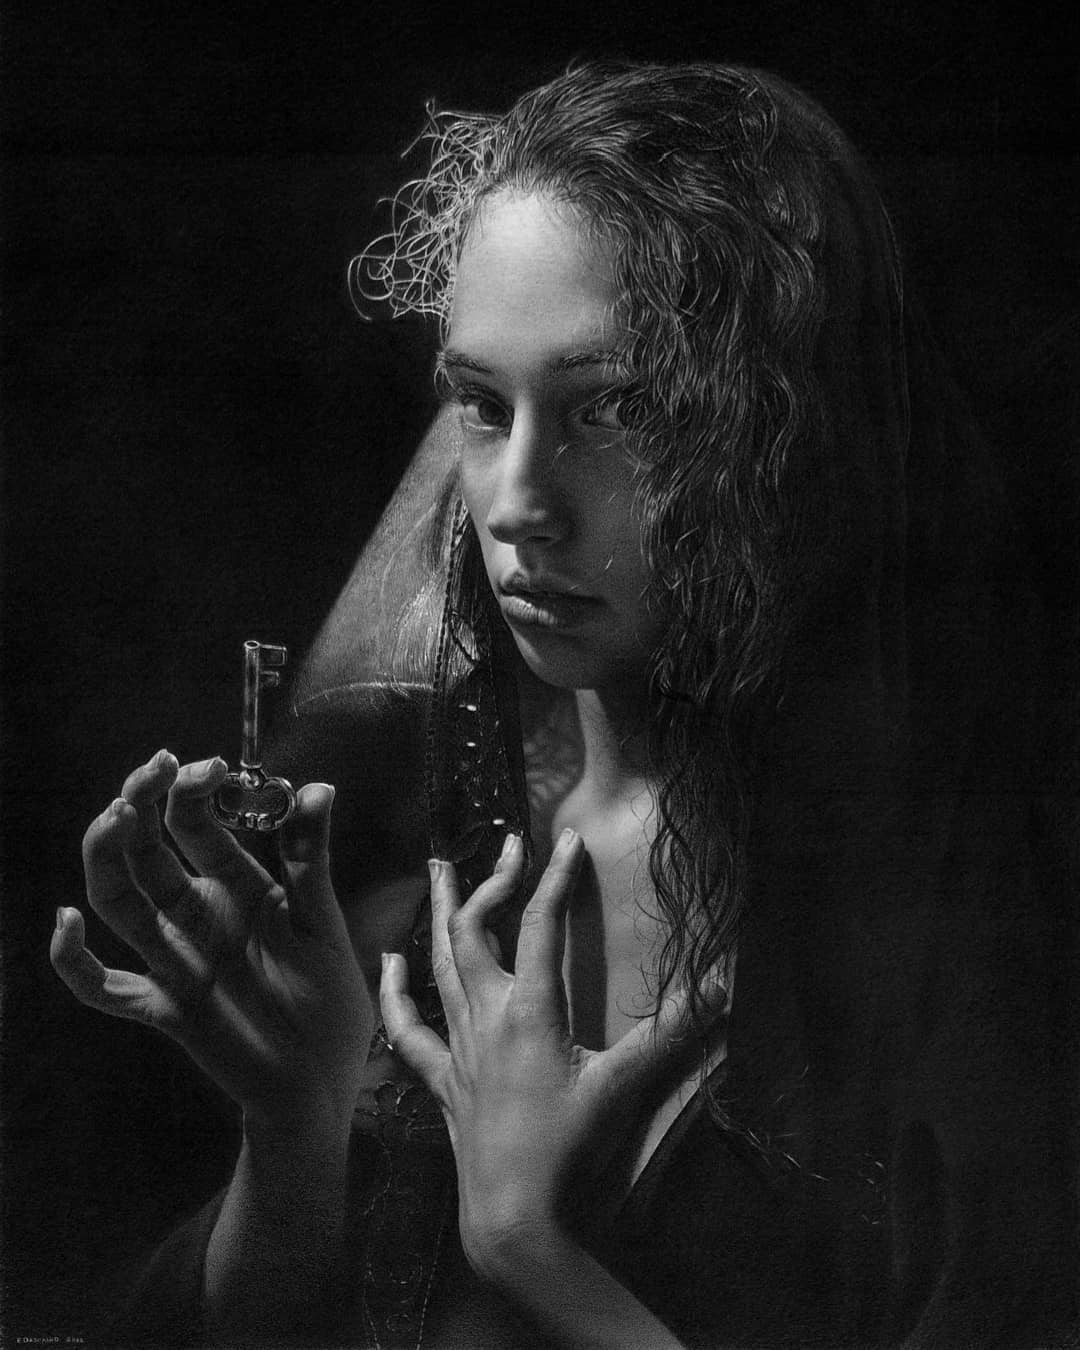 Hyper Realistic Pencil And Charcoal Portraits By Emanuele Dascanio 10